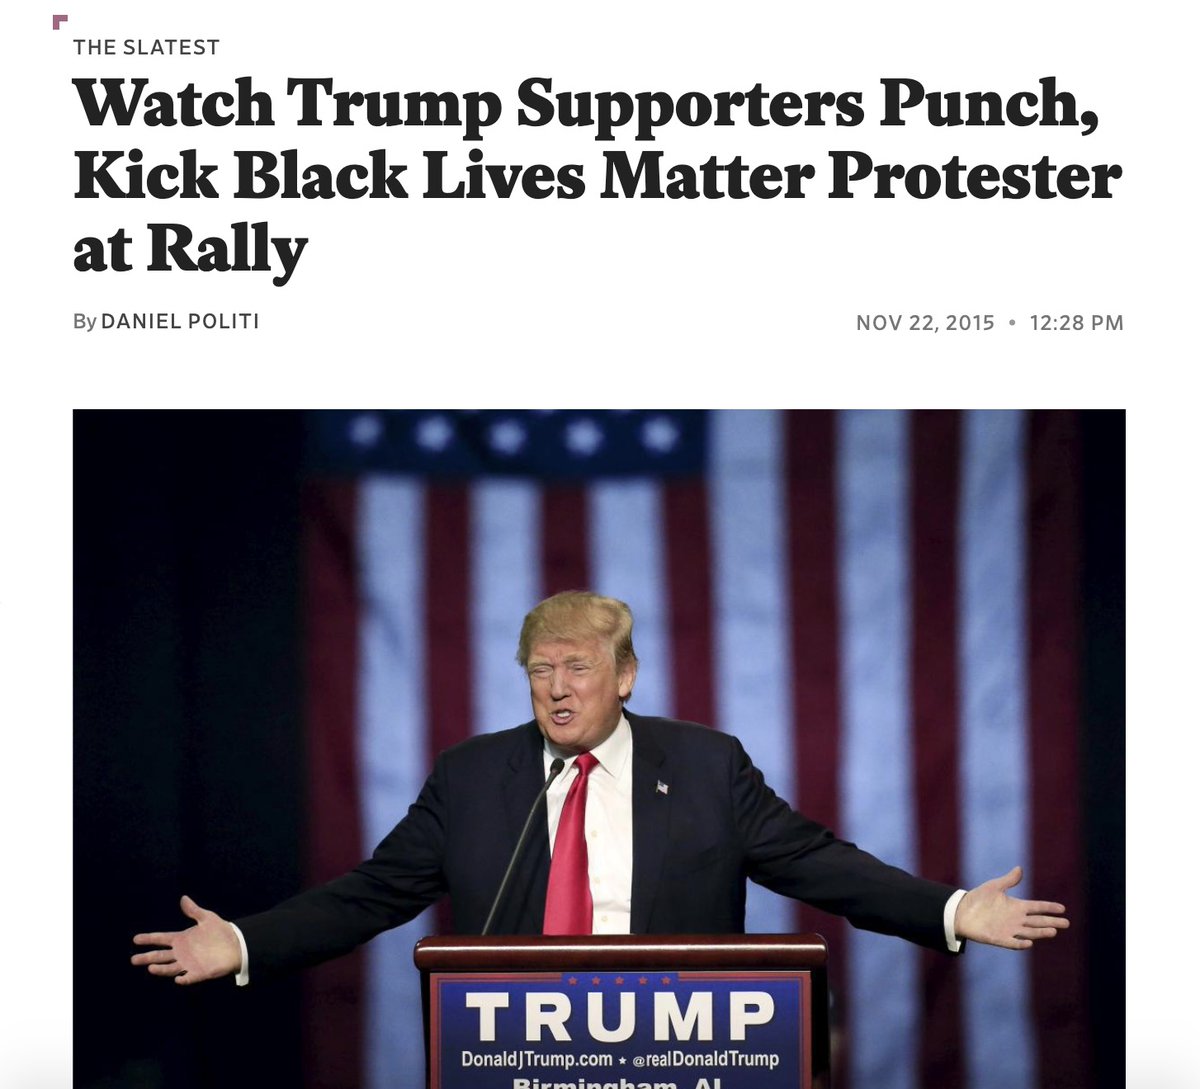 Trump has decried the Black Lives Matter movement and said he thinks they are “looking for trouble”.Meanwhile, he has increased the very policies that over-police, over-incarcerate, and destroy black communities.